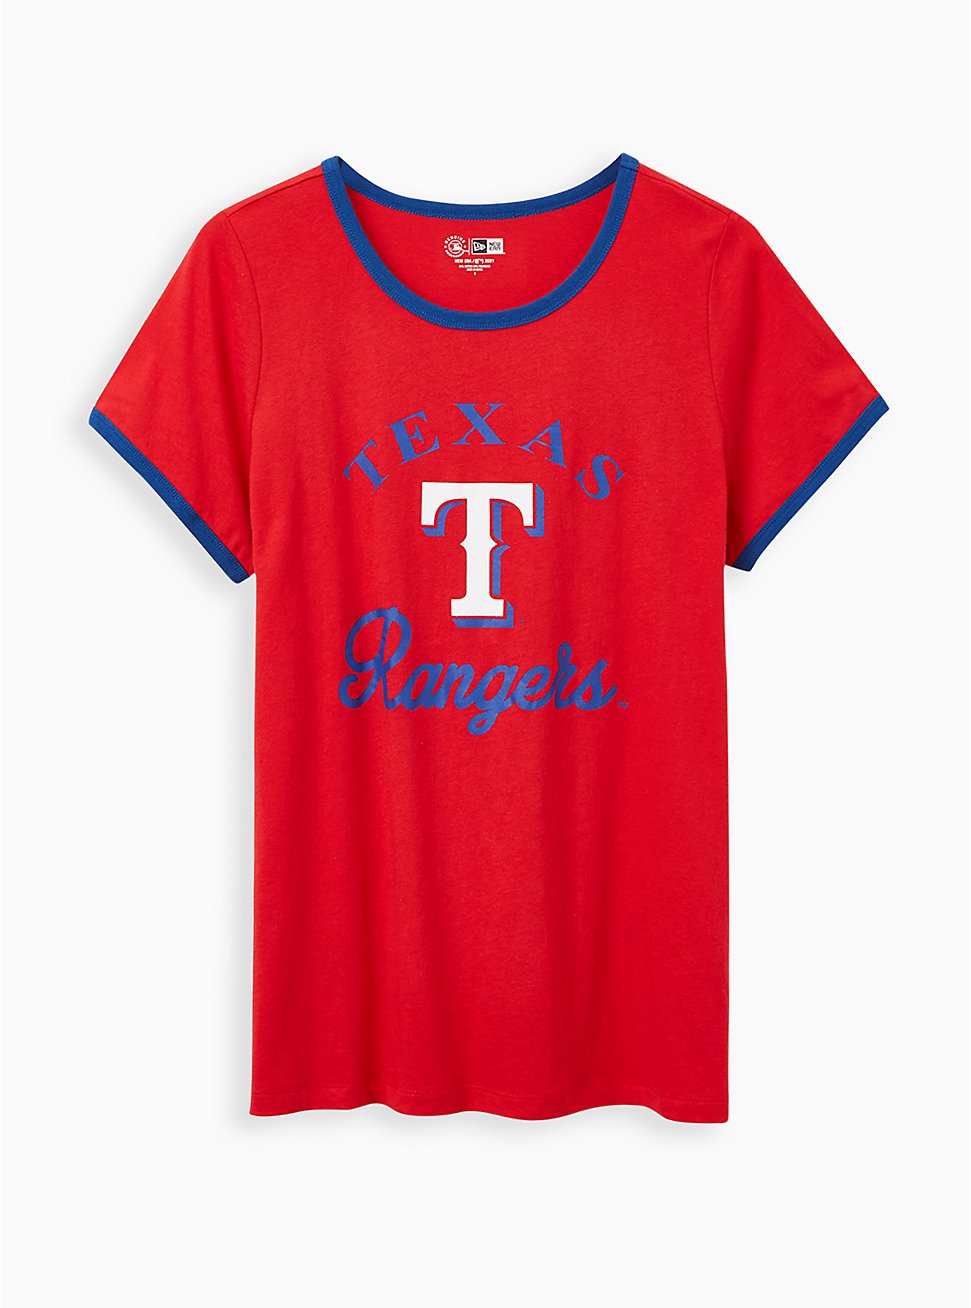 Classic Fit Ringer Tee - MLB Texas Rangers Red, RED, hi-res